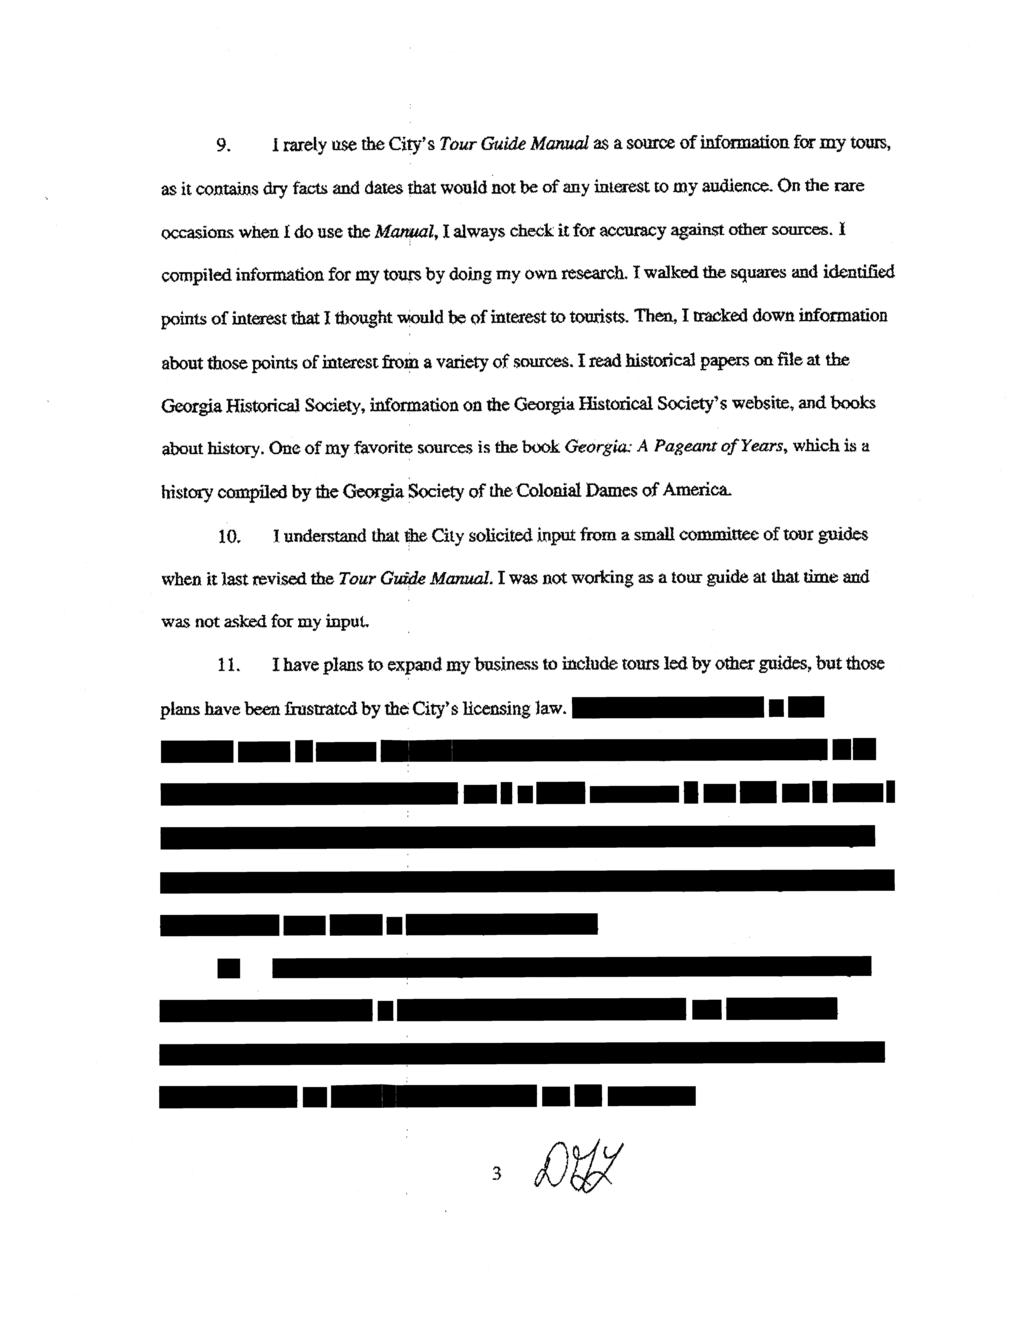 Case 4:14-cv-00247-WTM-GRS Document 30-1 Filed 07/30/15 Page 3 of 7 REDACTED INFORMATION FILED SEPARATELY UNDER SEAL 9. I rarely use the City's Tour Gui.de Manual as a source of infor.